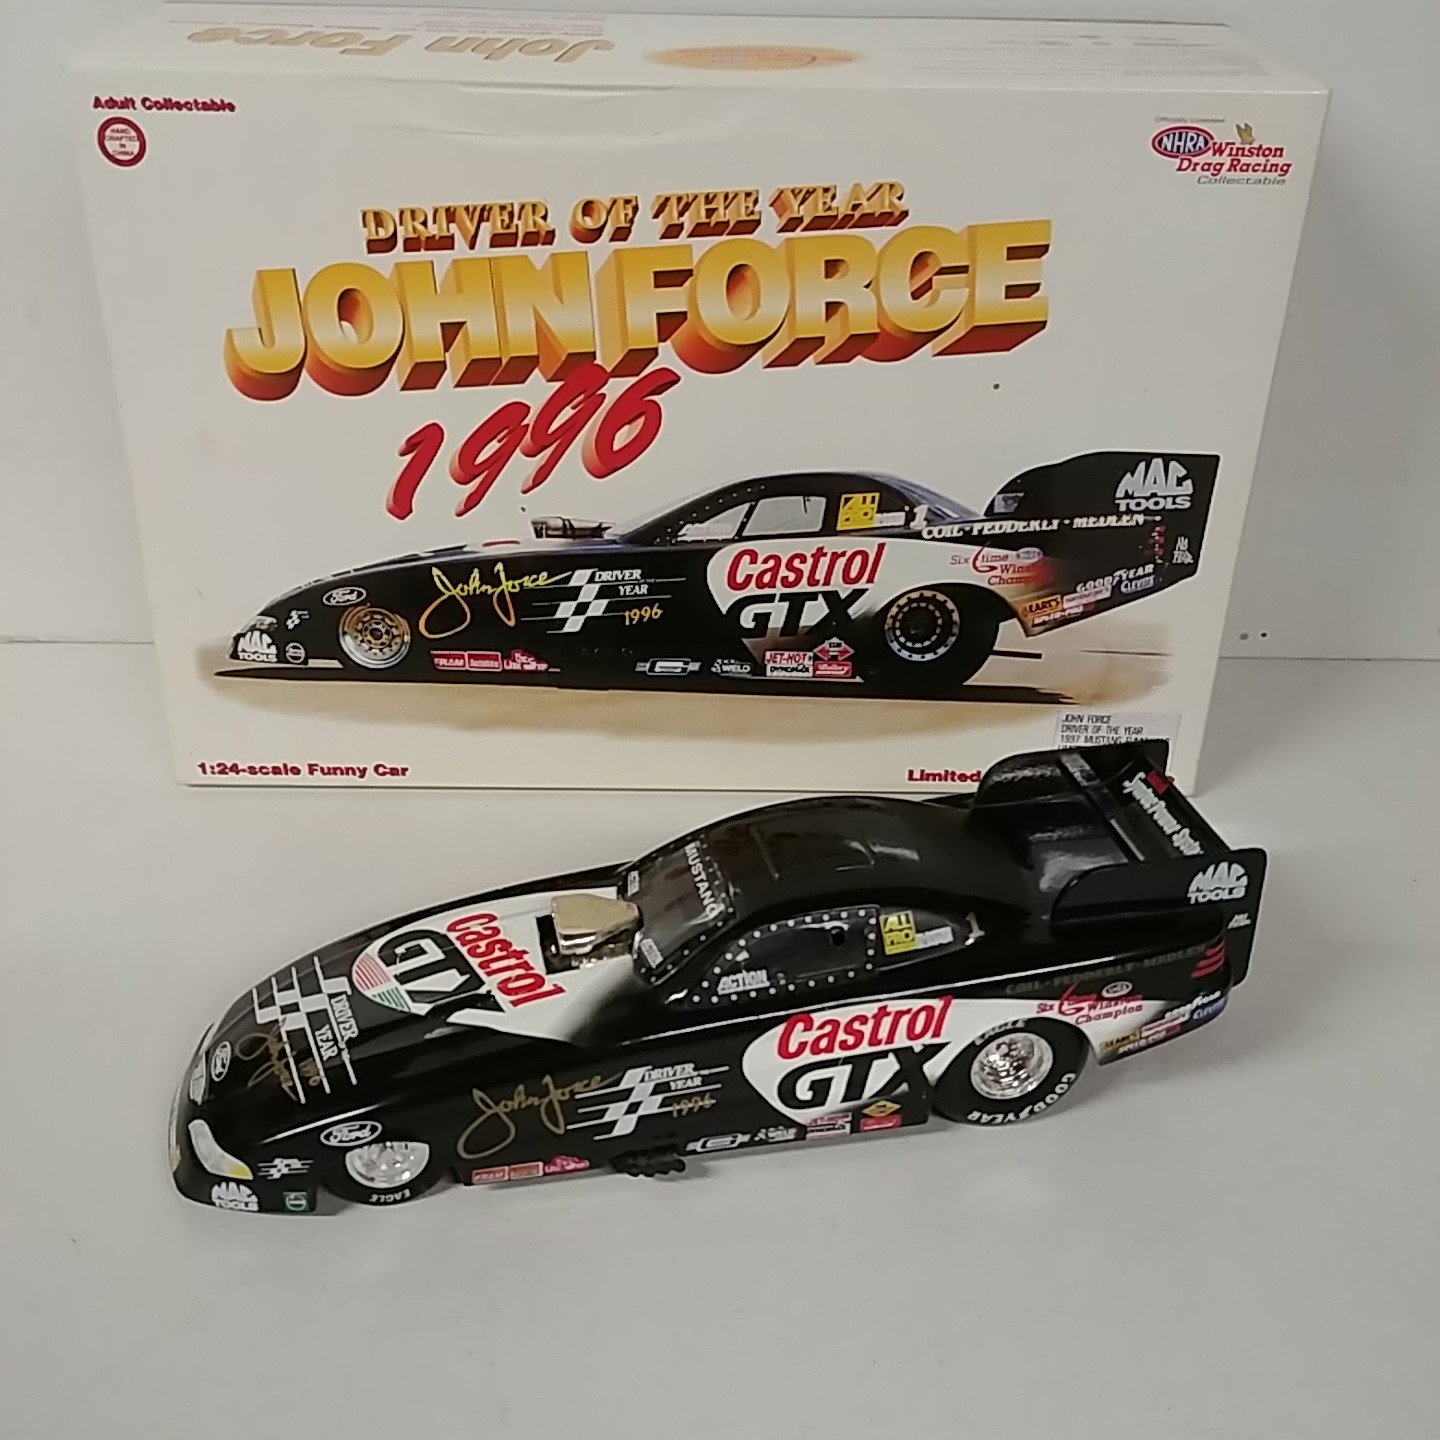 1996 John Force 1/24th Castrol GTX "Driver of the Year" funny car